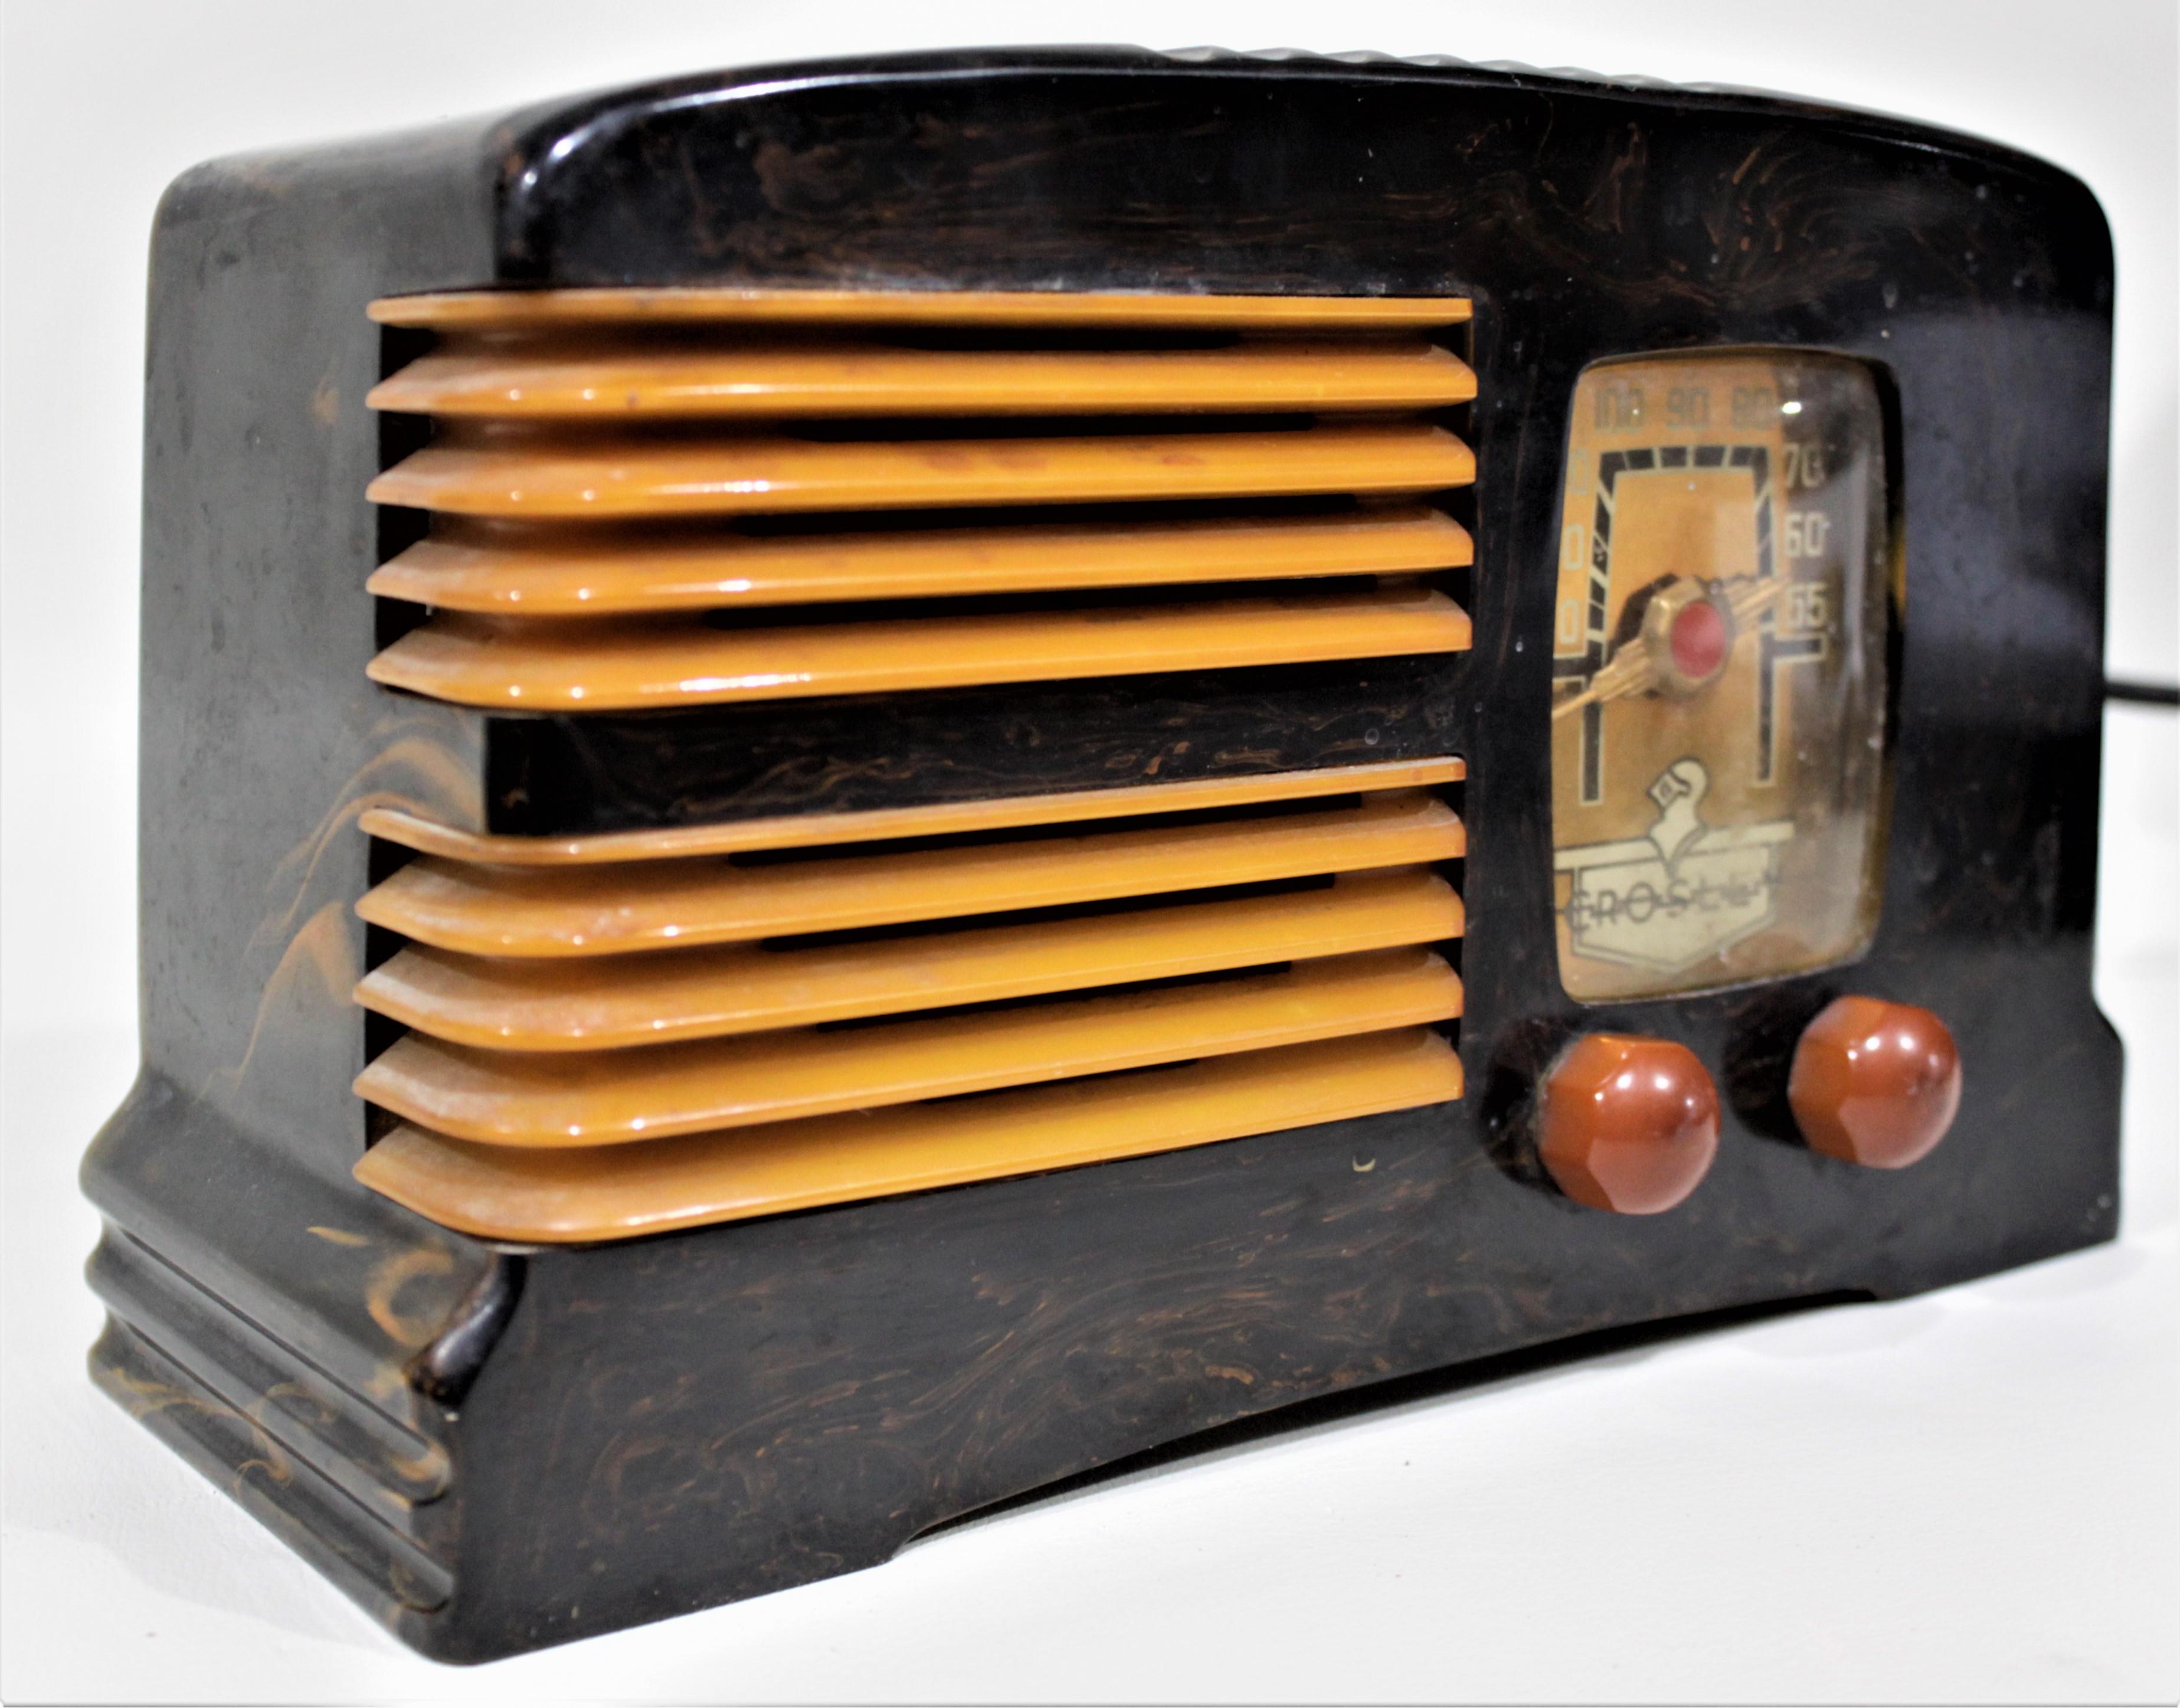 This Crosely model G-1465 radio was produced by the Moffats Limited of Weston Ontario Canada, now Toronto in the period and style of the Art Deco movement. The radio is composed of catalin, which pre-dates bakelite, and is done in a black and